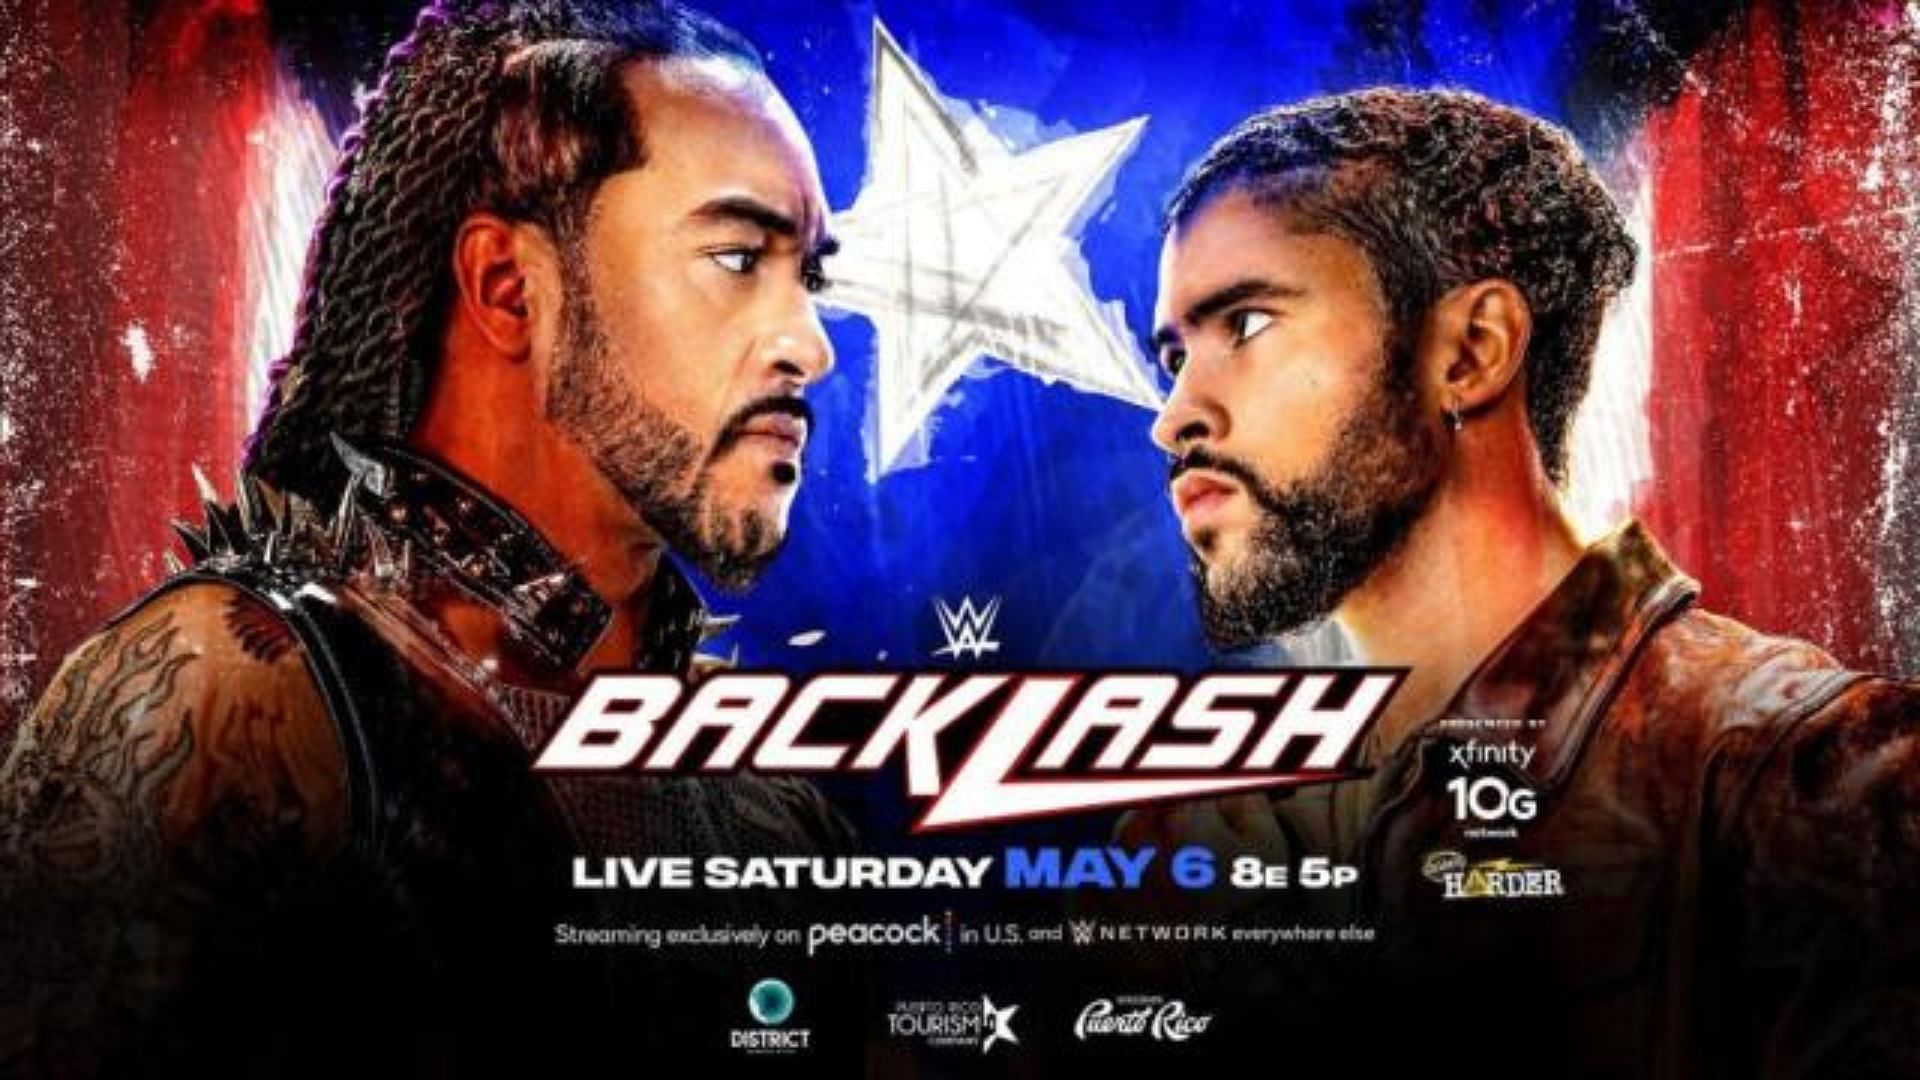 Bad Bunny is involved in one of the Double Main Event for WWE Backlash